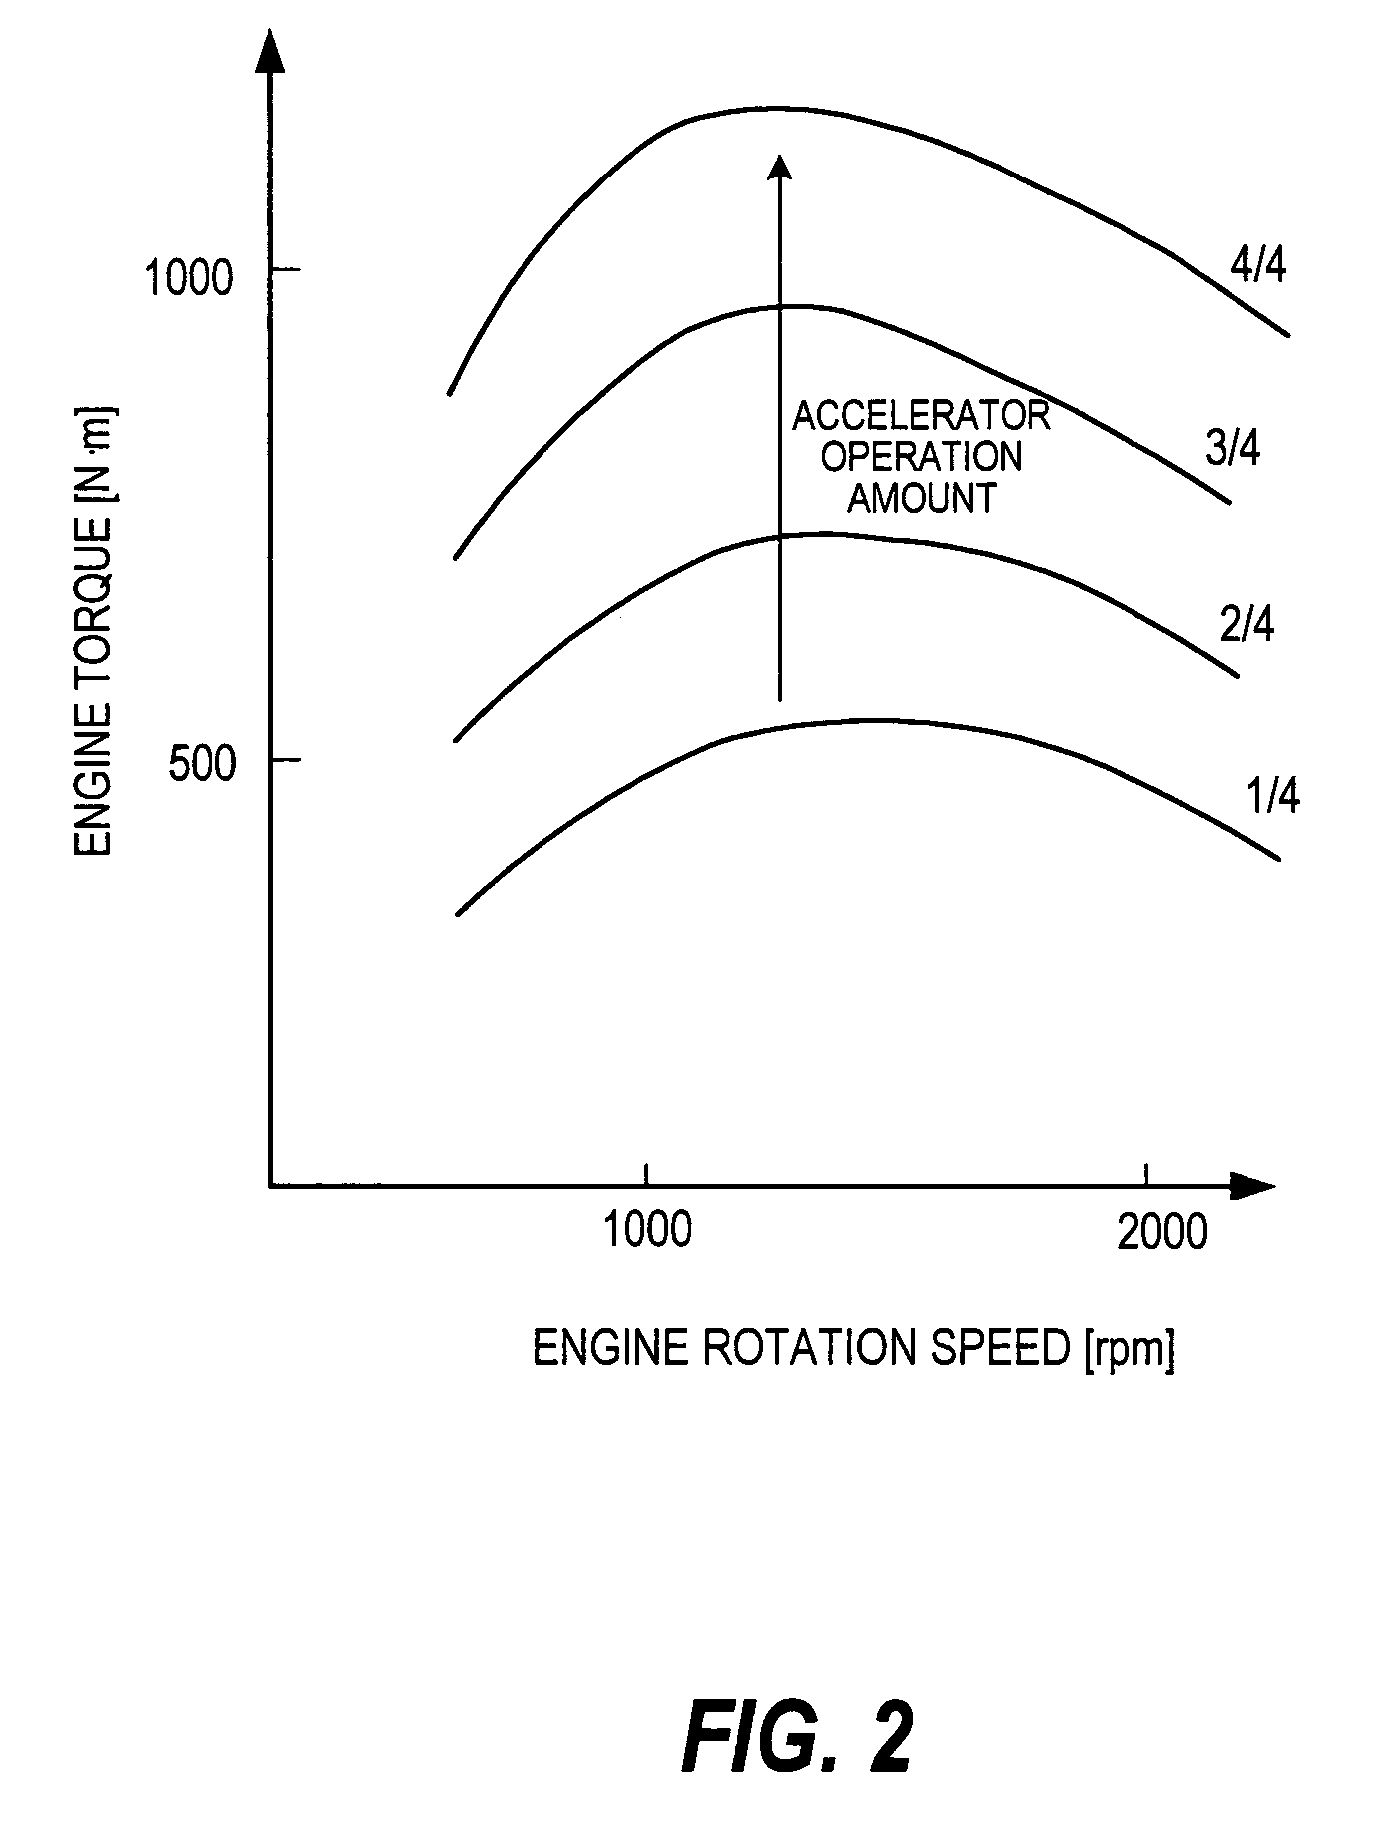 Evaluation system for vehicle operating conditions